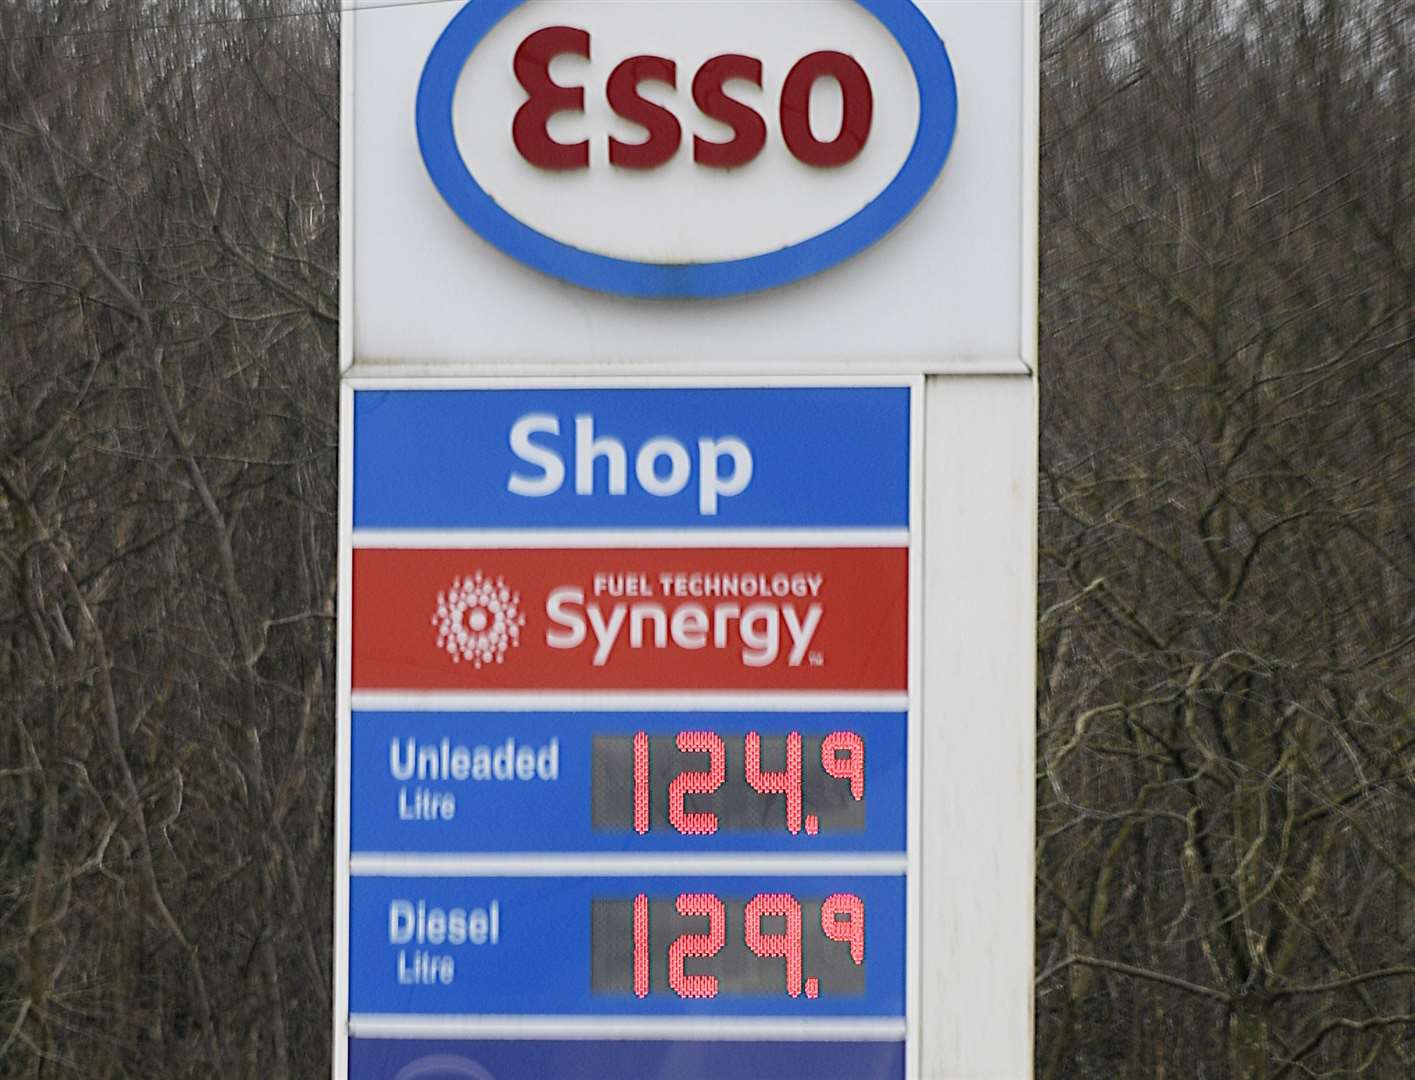 Prices at Esso in Stowting are higher than those at supermarkets